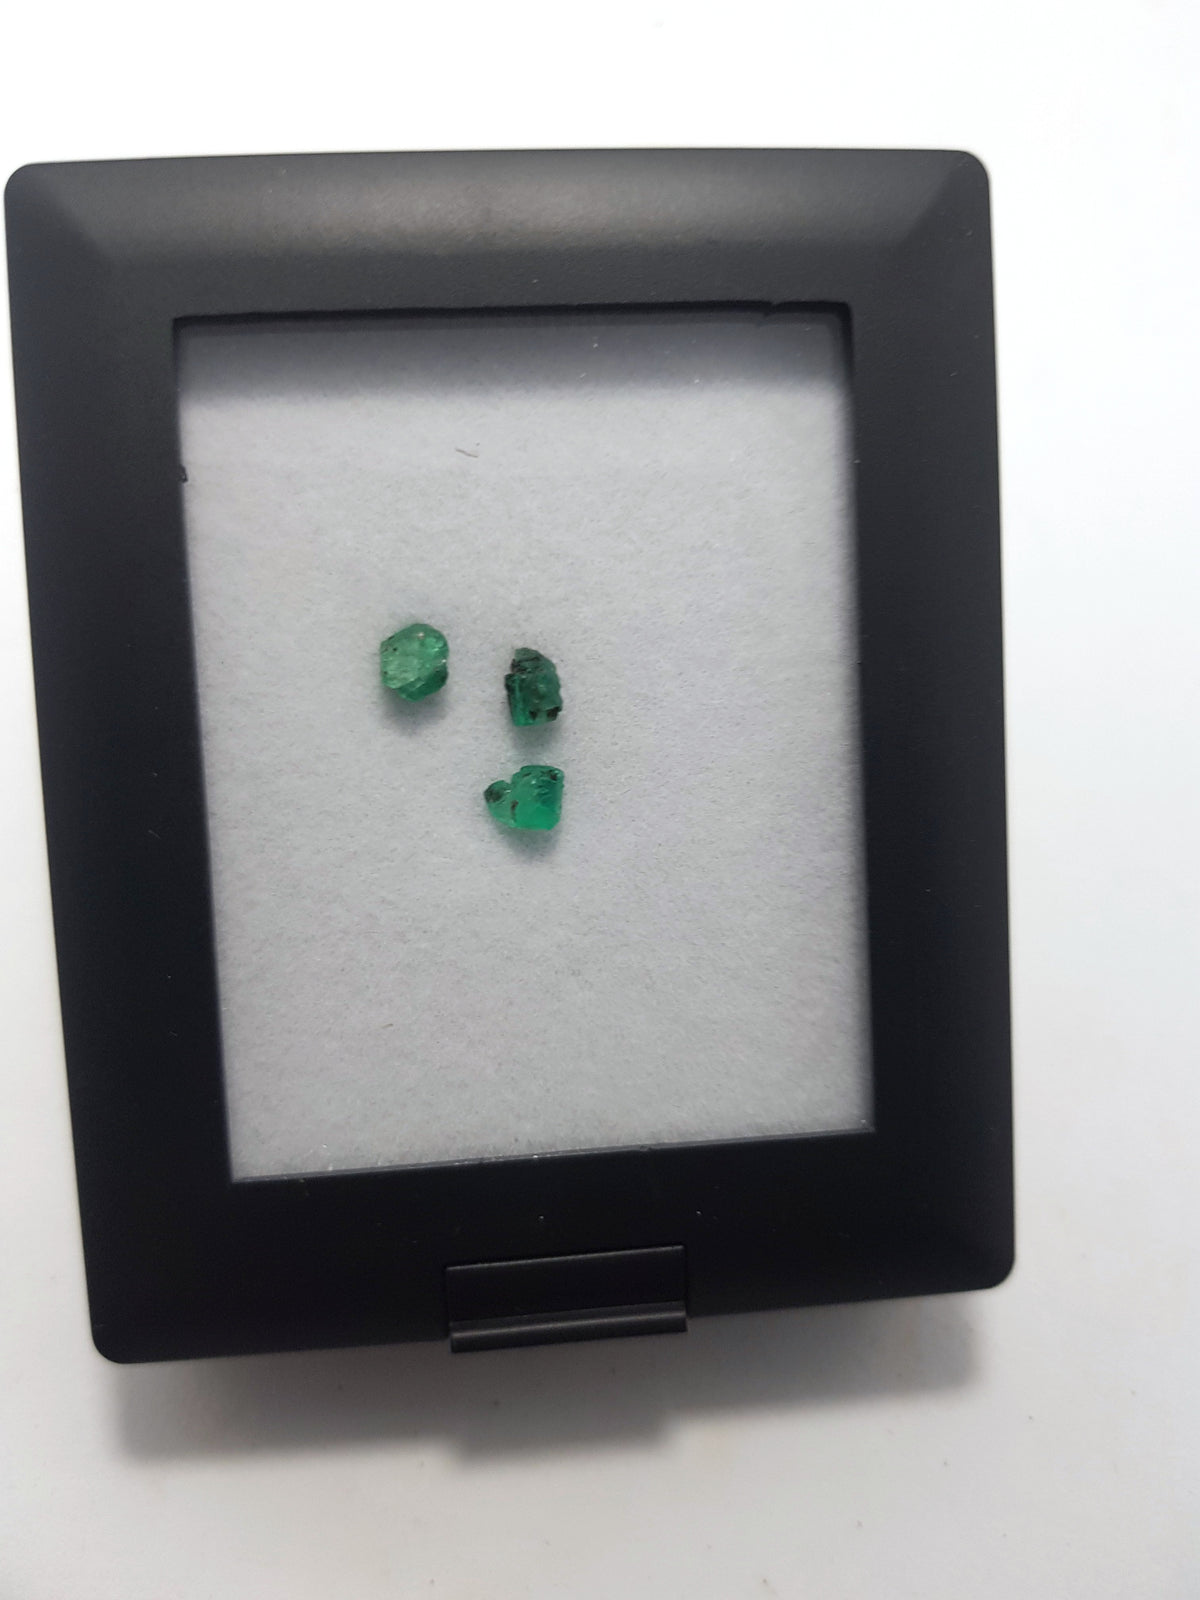 3 raw emerlds in a display case. The display box is black, the emeralds are displayed on white foam.